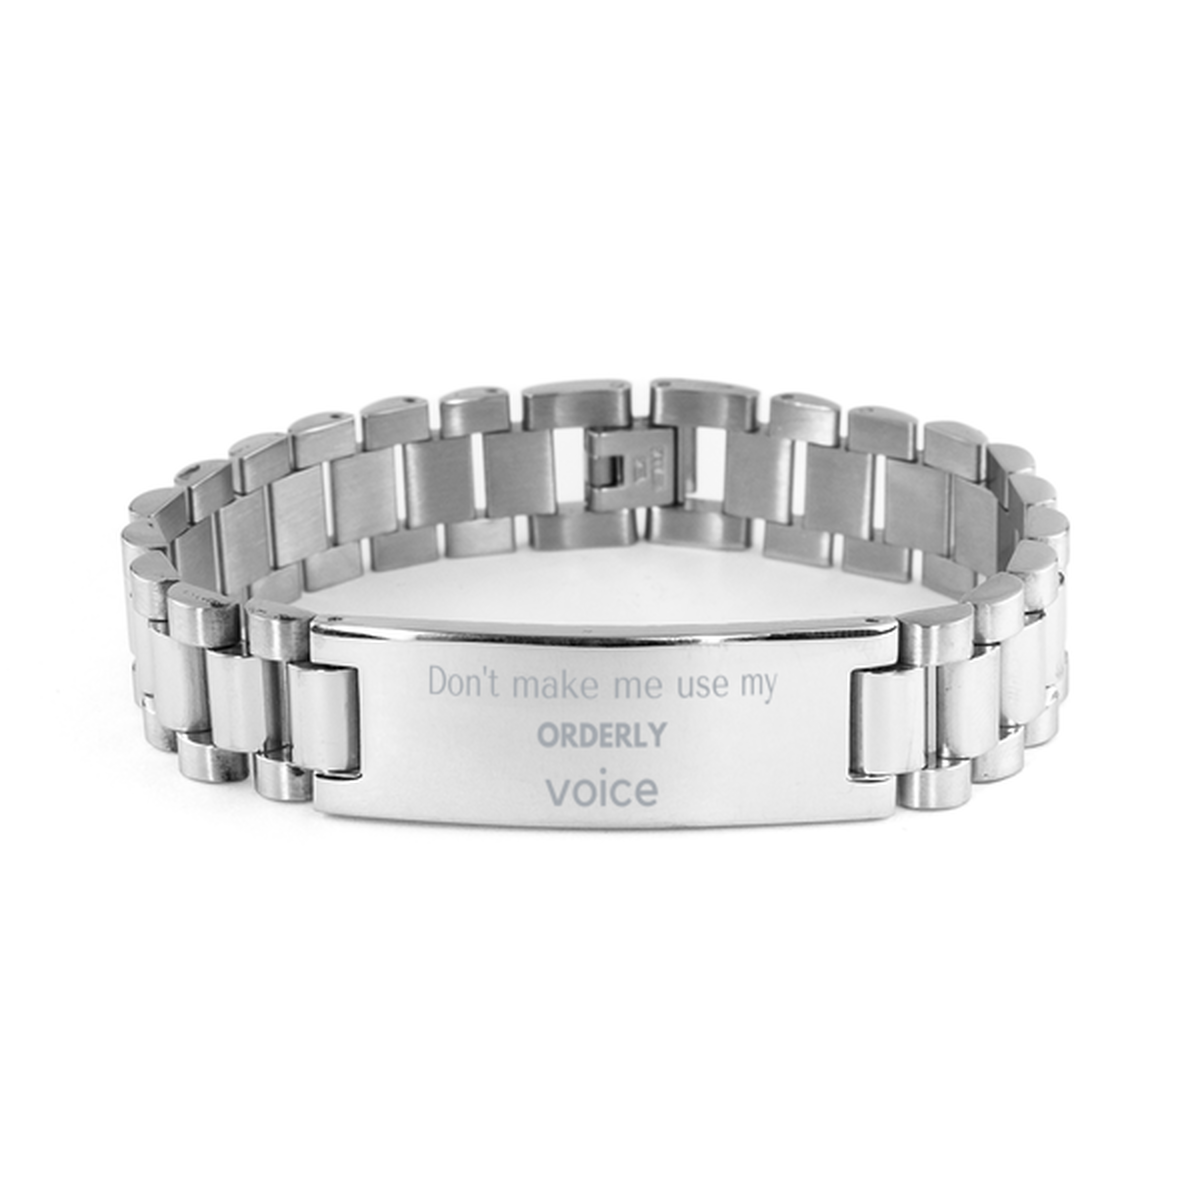 Don't make me use my Orderly voice, Sarcasm Orderly Gifts, Christmas Orderly Ladder Stainless Steel Bracelet Birthday Unique Gifts For Orderly Coworkers, Men, Women, Colleague, Friends